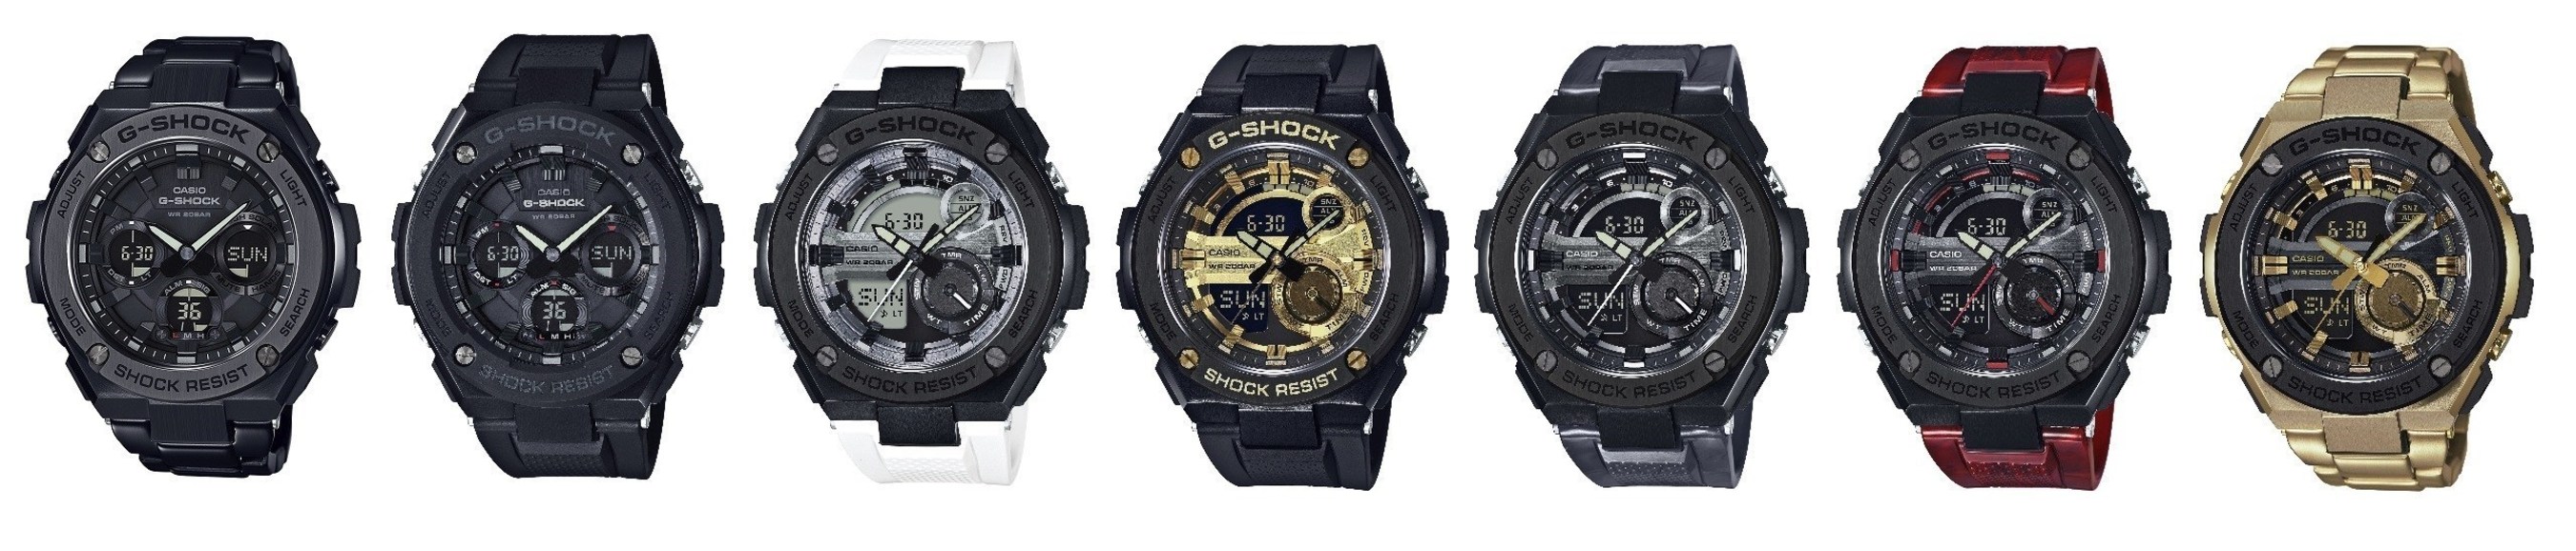 Seven new releases to the G-SHOCK G-STEEL collection.